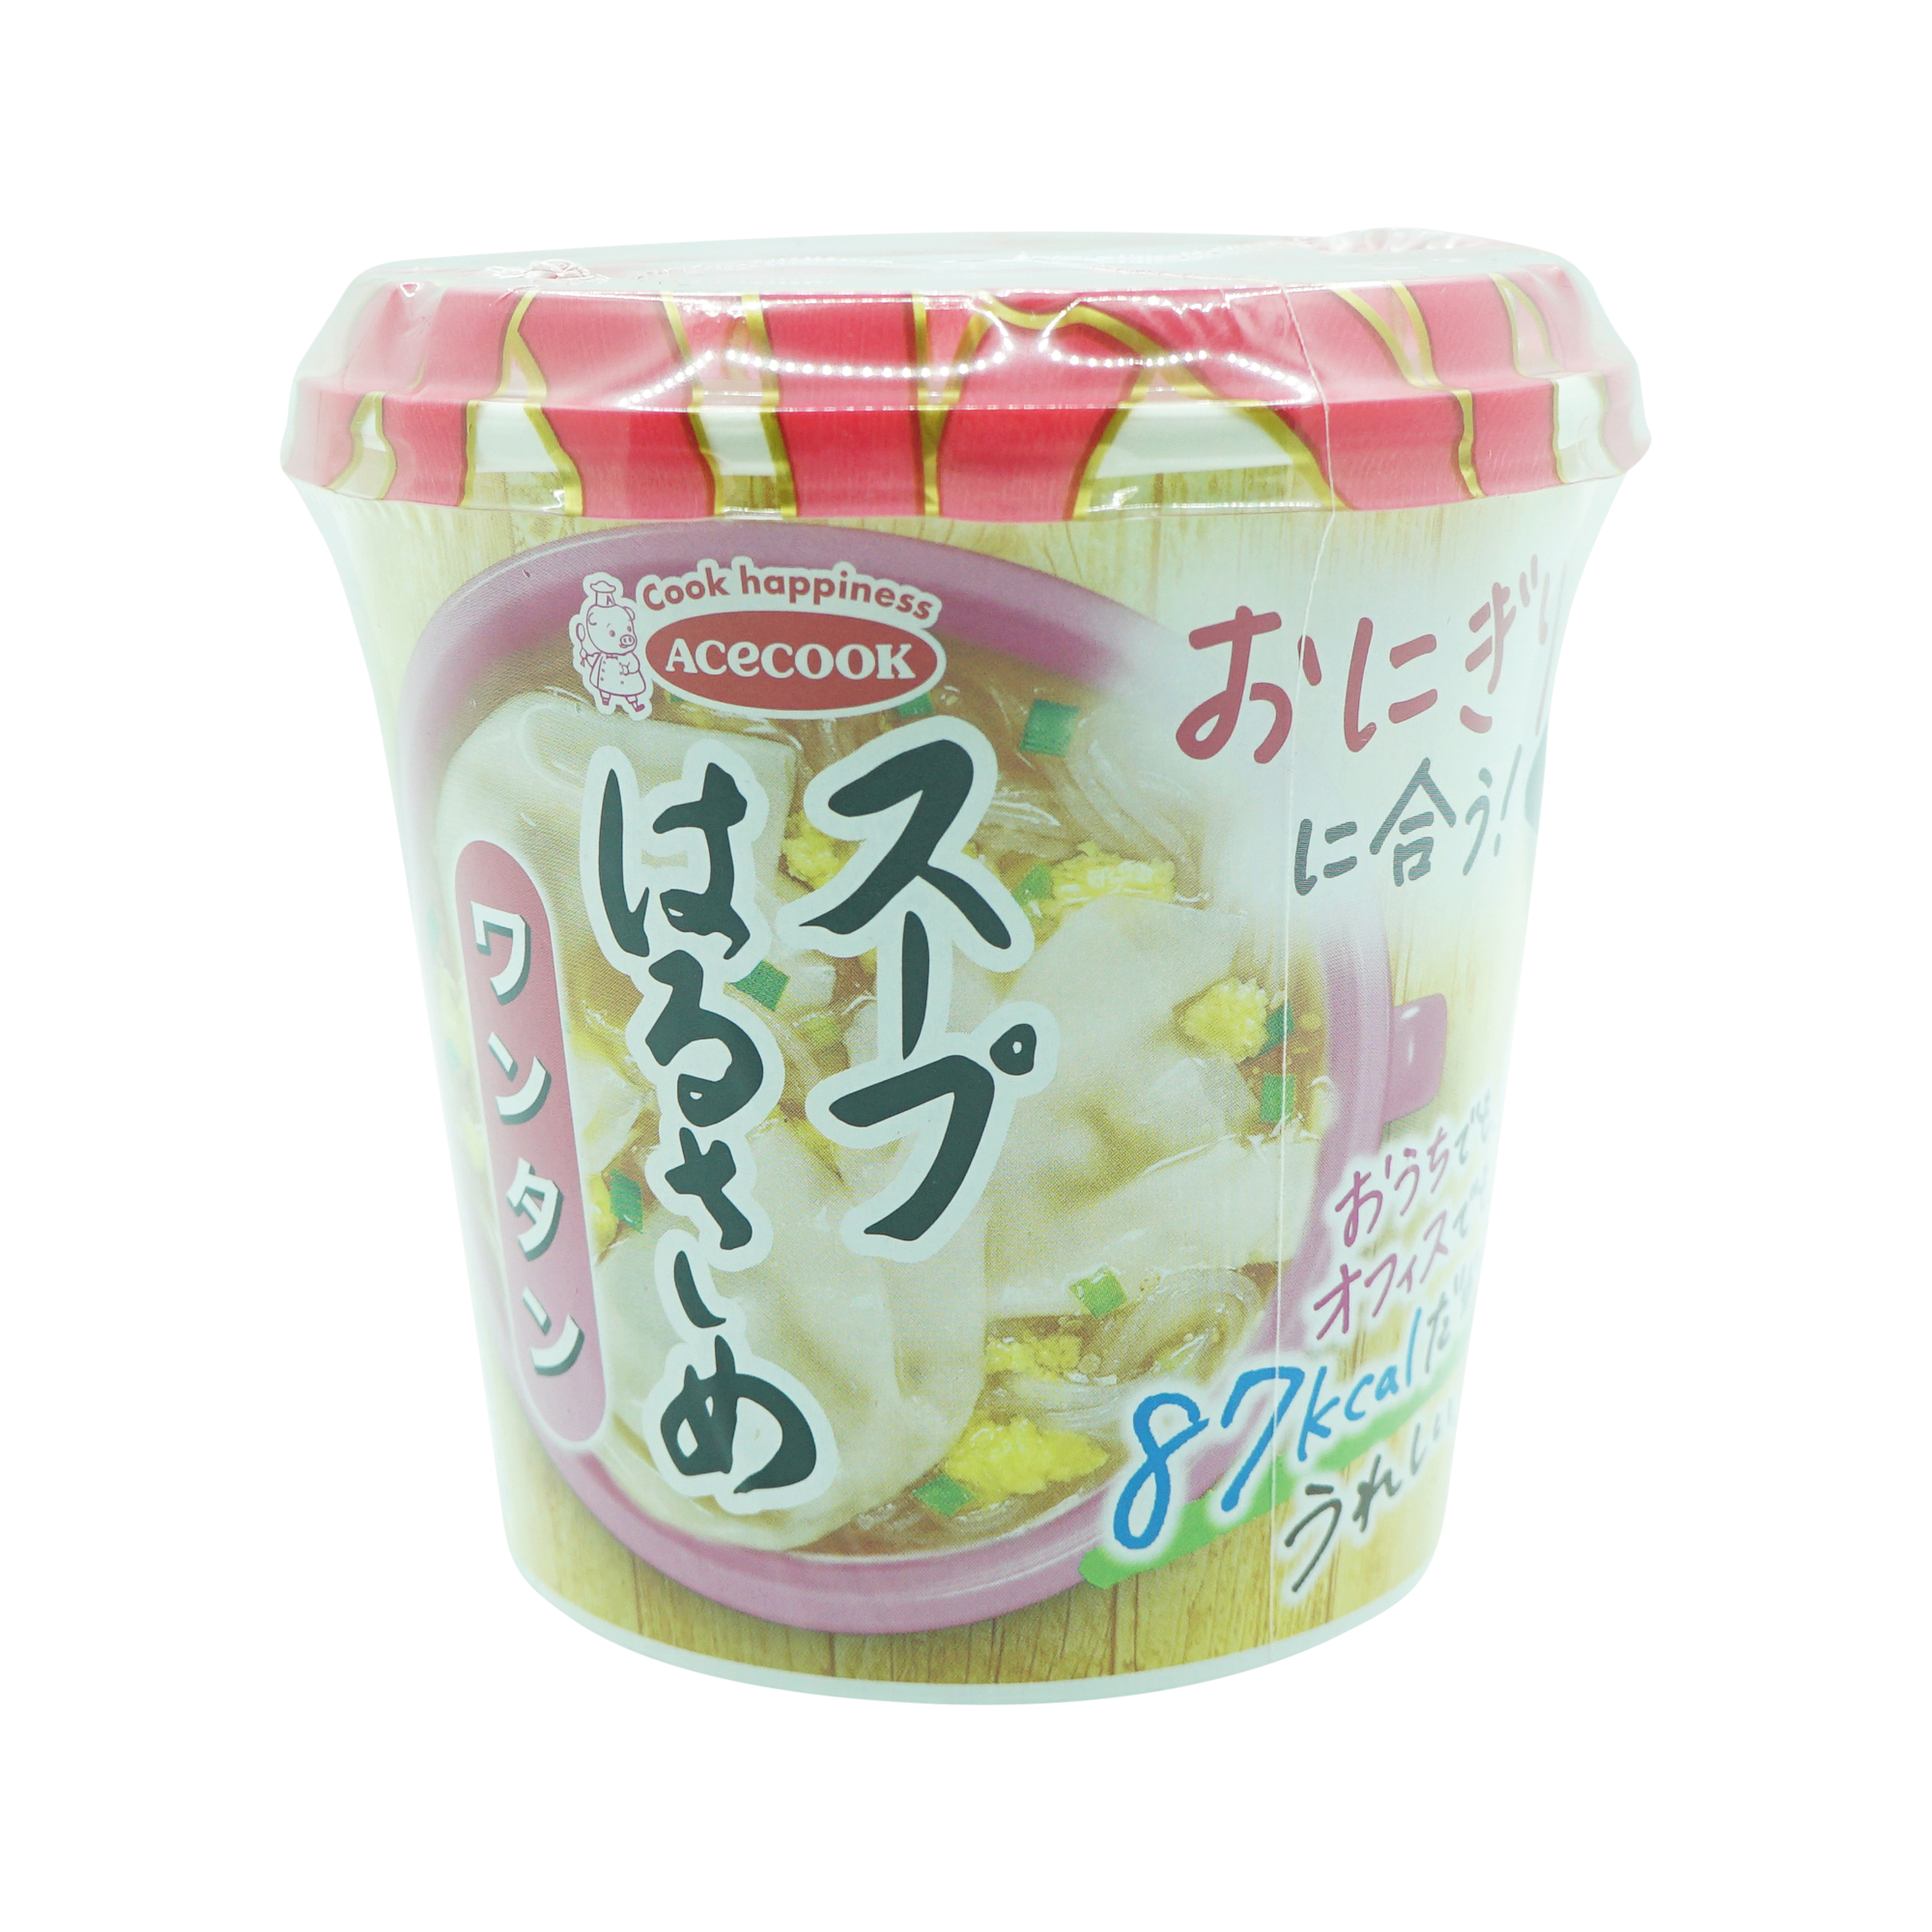 Ace Cook Vermicelli Harusame Wonton Soup24g